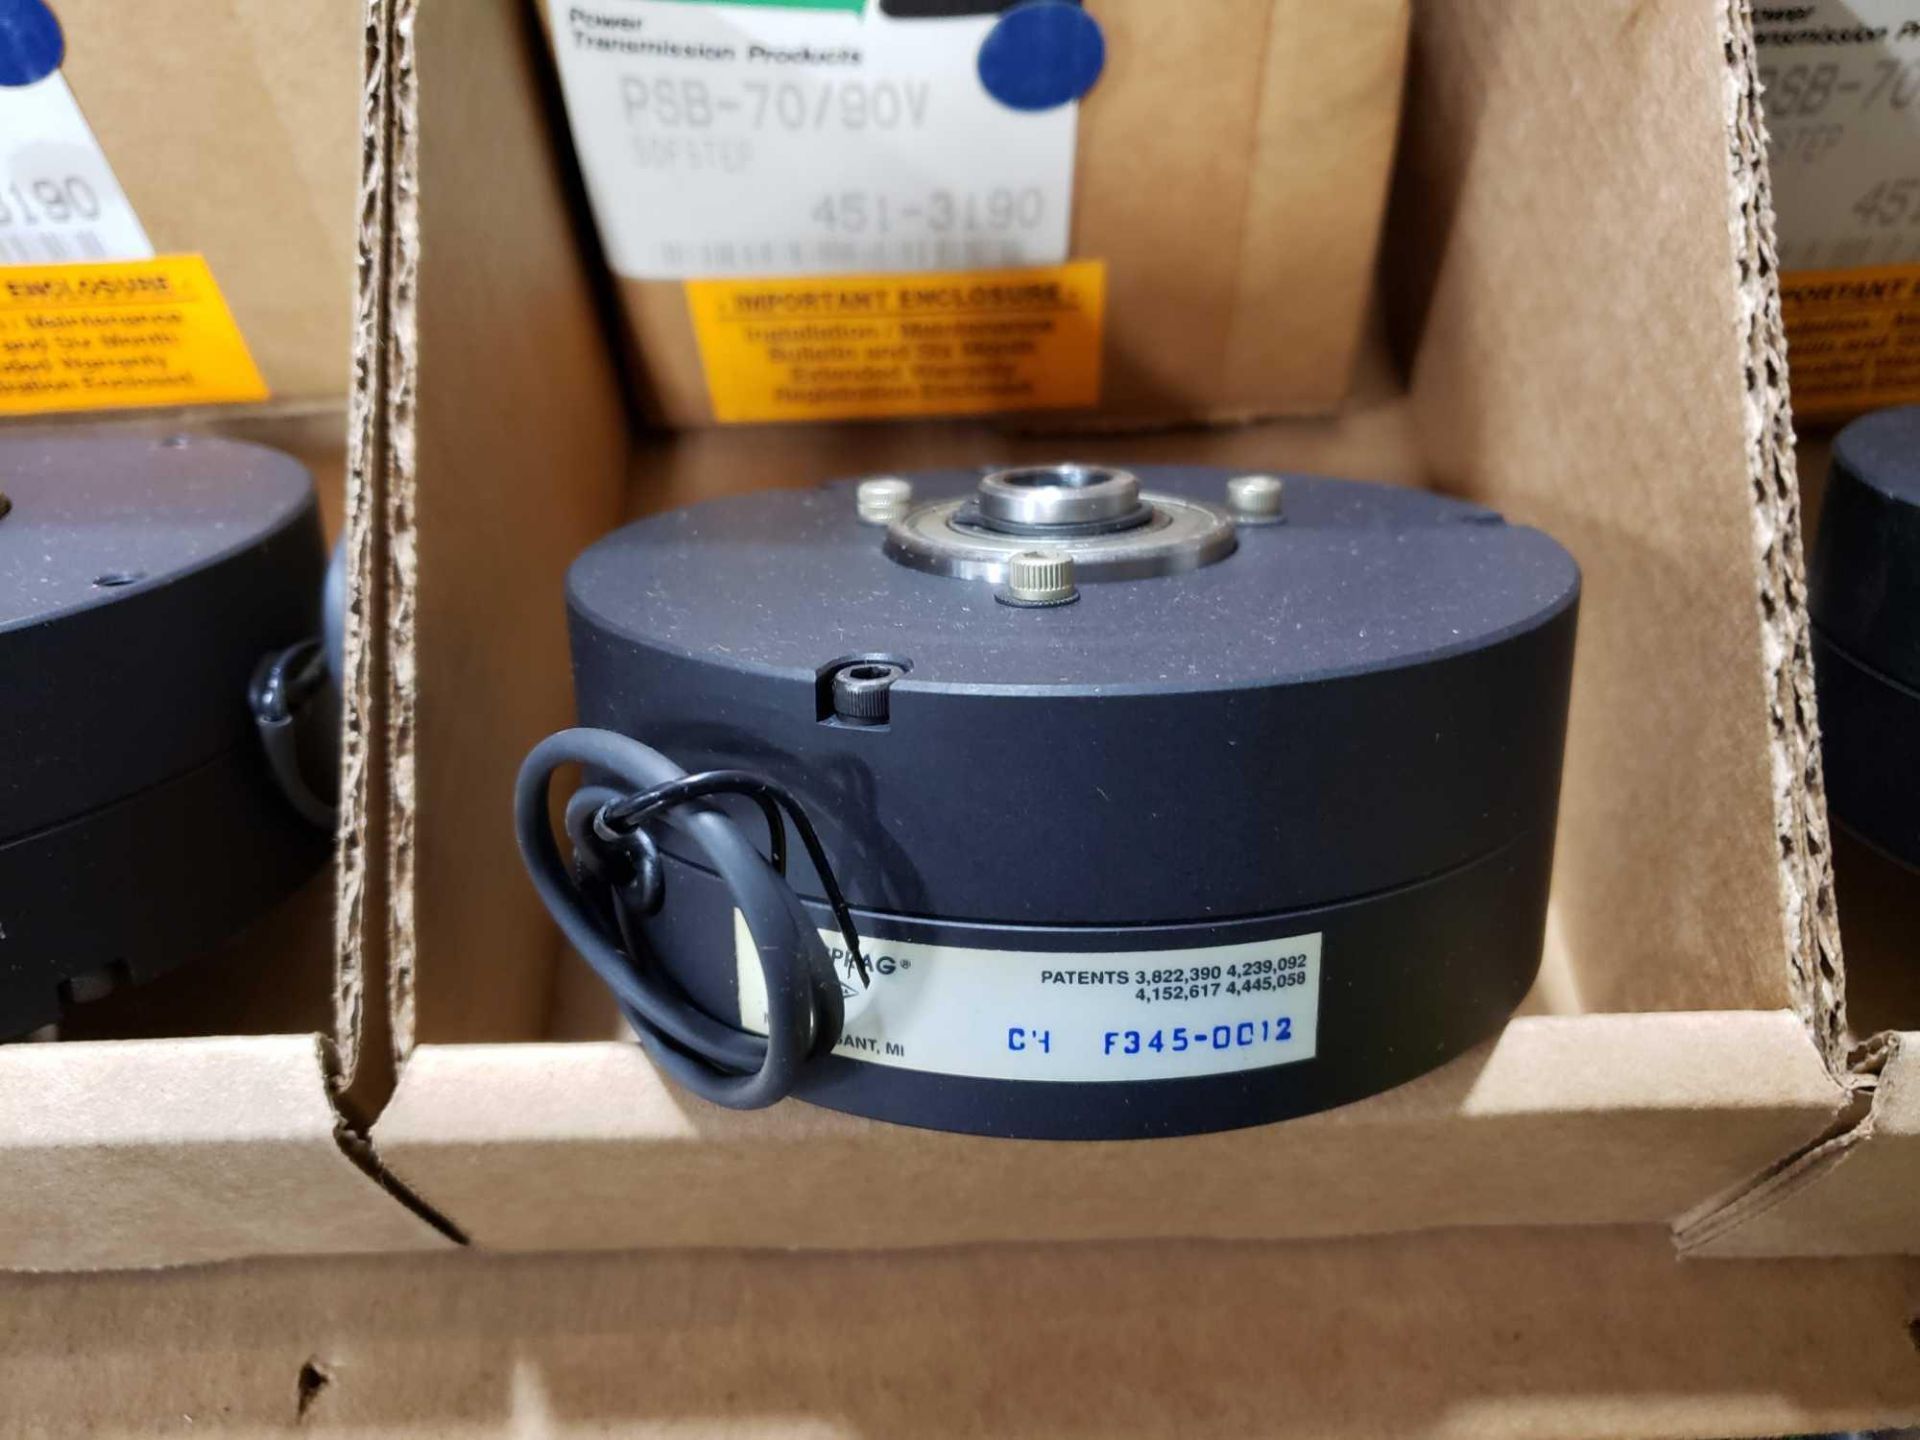 Formsprag Magpowr sofstep model PSB-70/90V magnetic partical clutch brake. New in box. This item can - Image 2 of 3